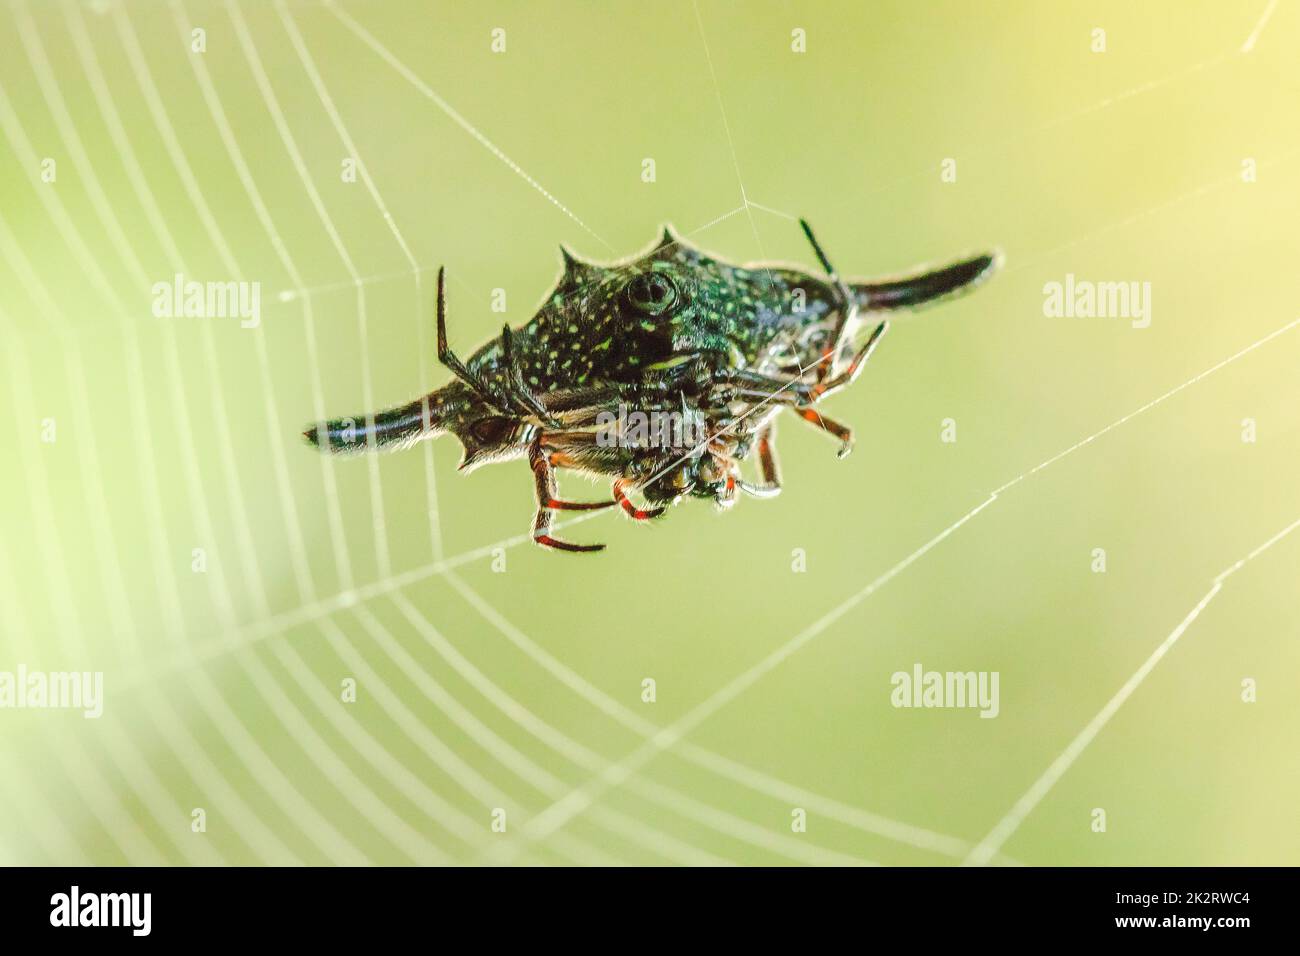 Spiny orb-weavers are knitting fibers to trap insects in nature. Stock Photo